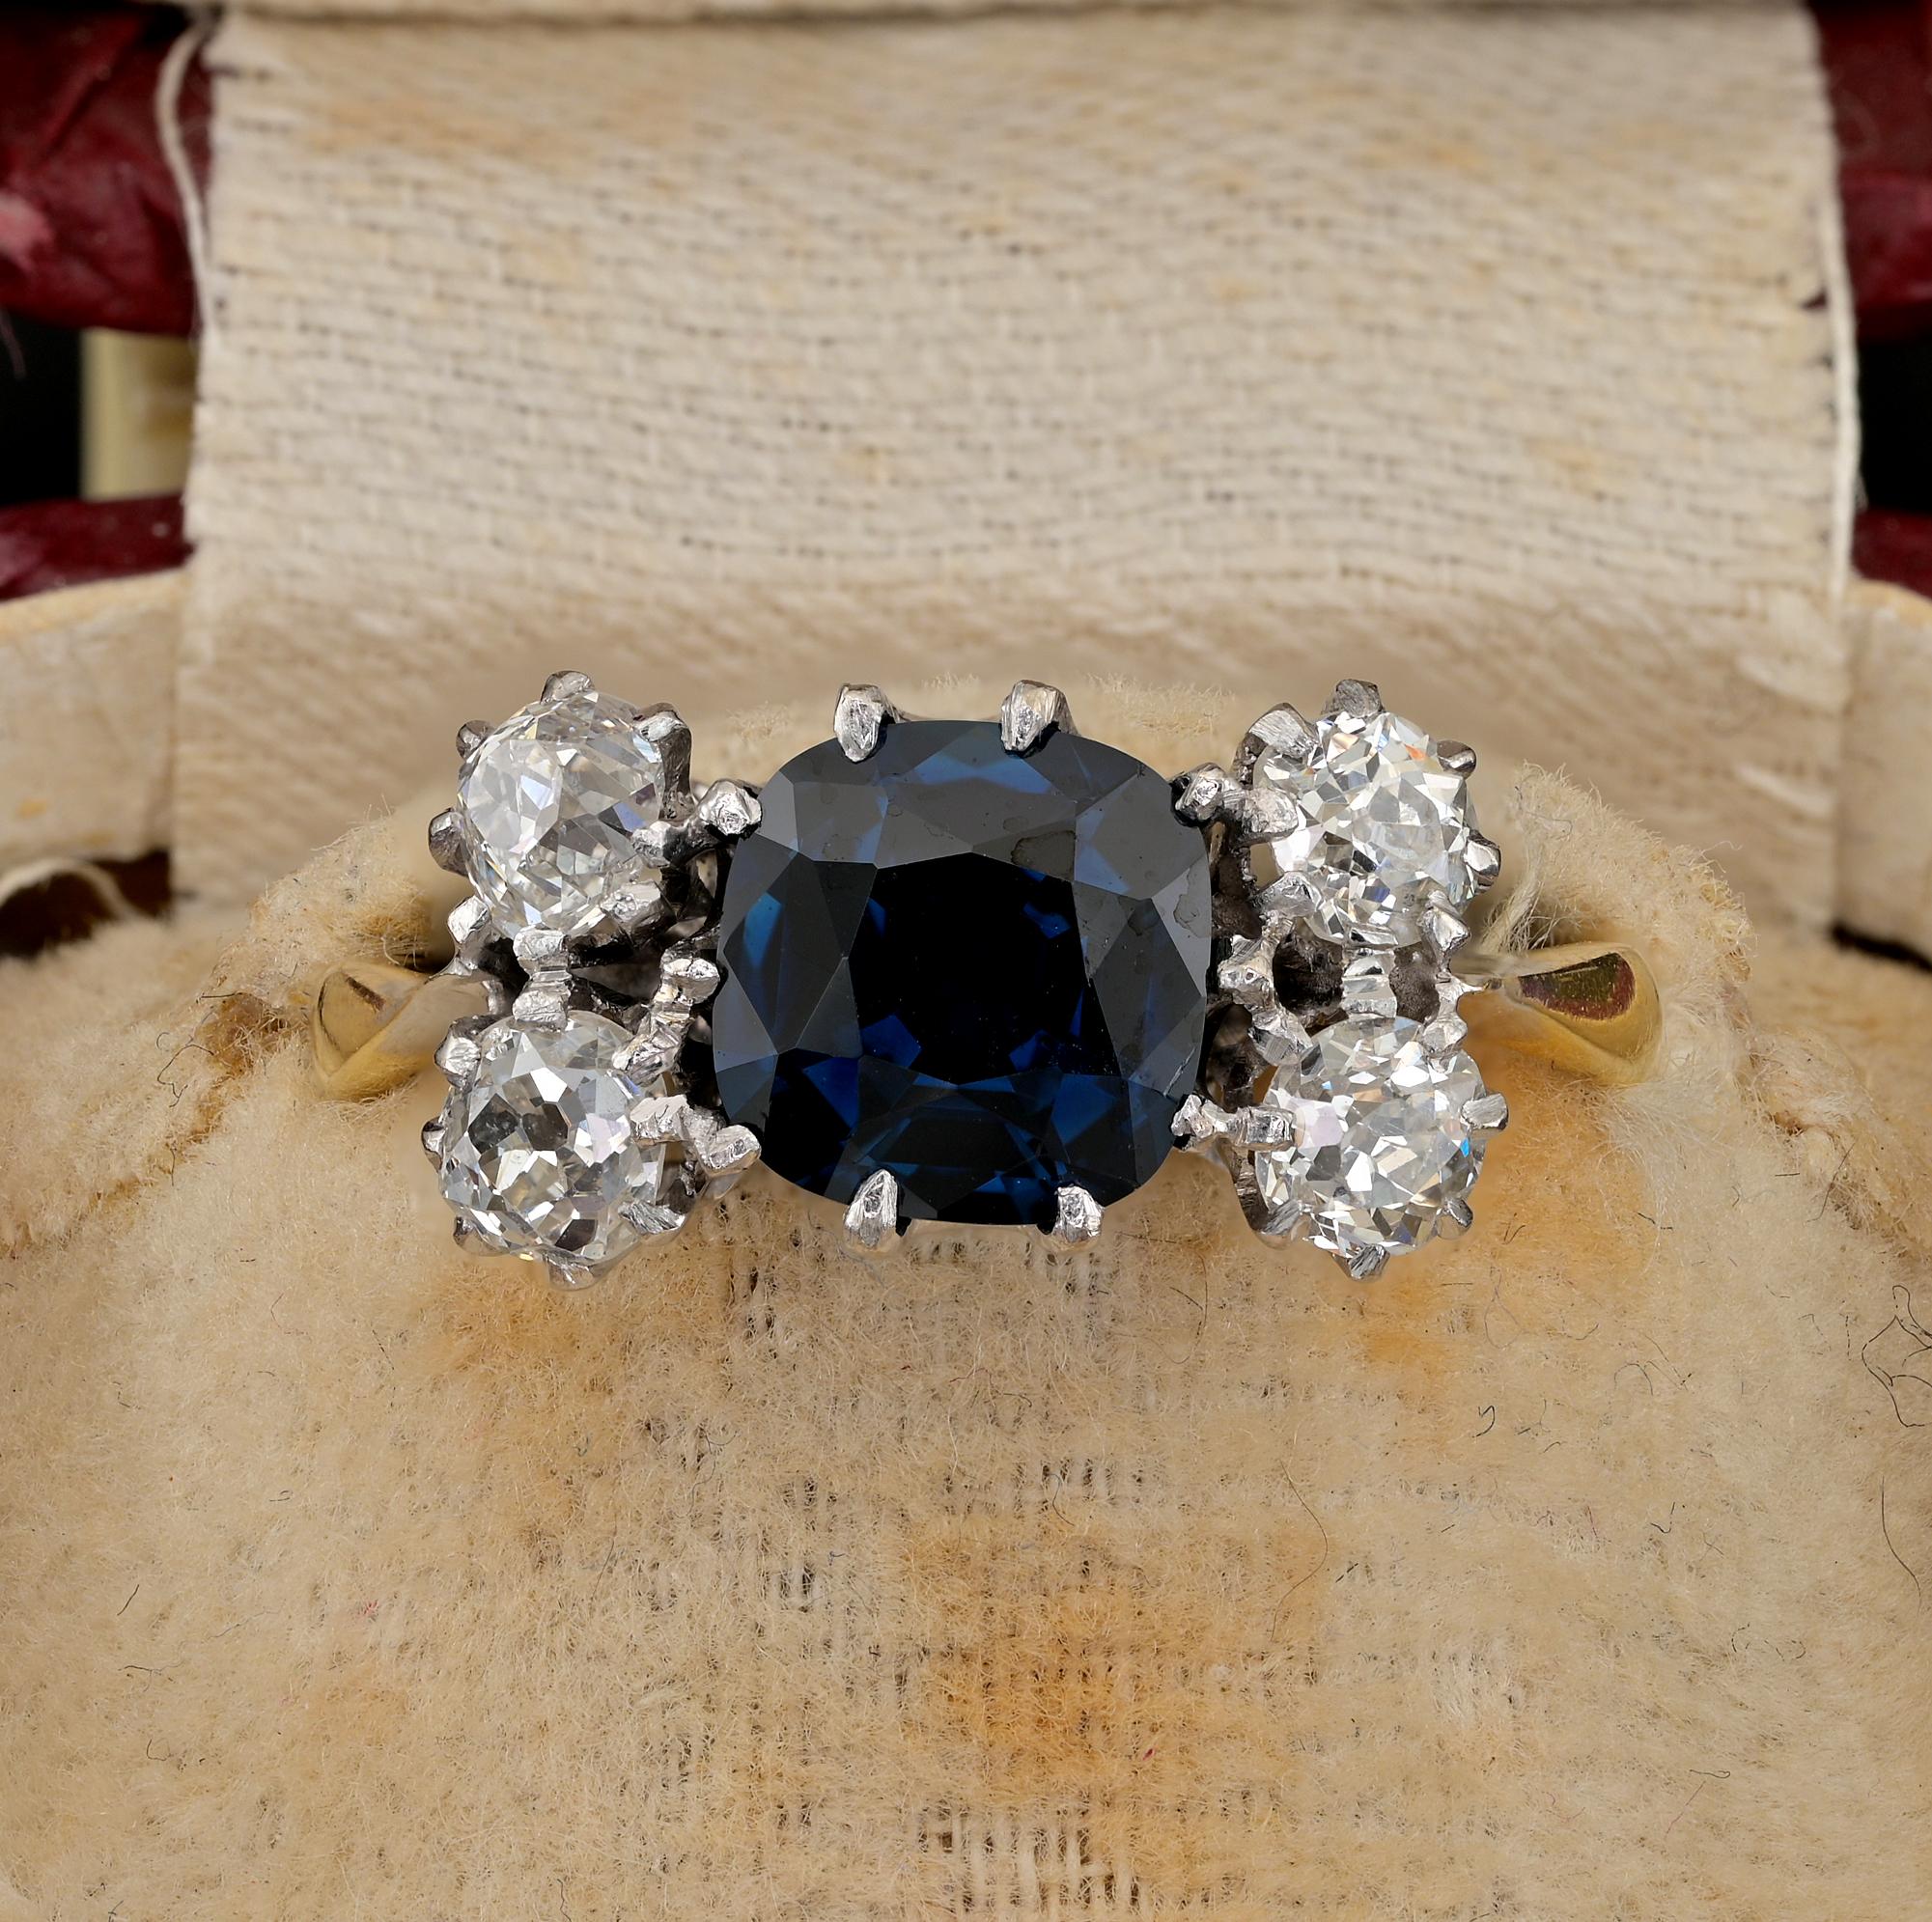 This appealing  Sapphire & Diamond Art Deco ring, is 1920 ca.
Appealing timeless design rendered in a skilfully hand crafted mount of  solid 18 kt gold and Platinum
Hand crafted mounting of solid 18 KT gold with solid platinum stone setting,